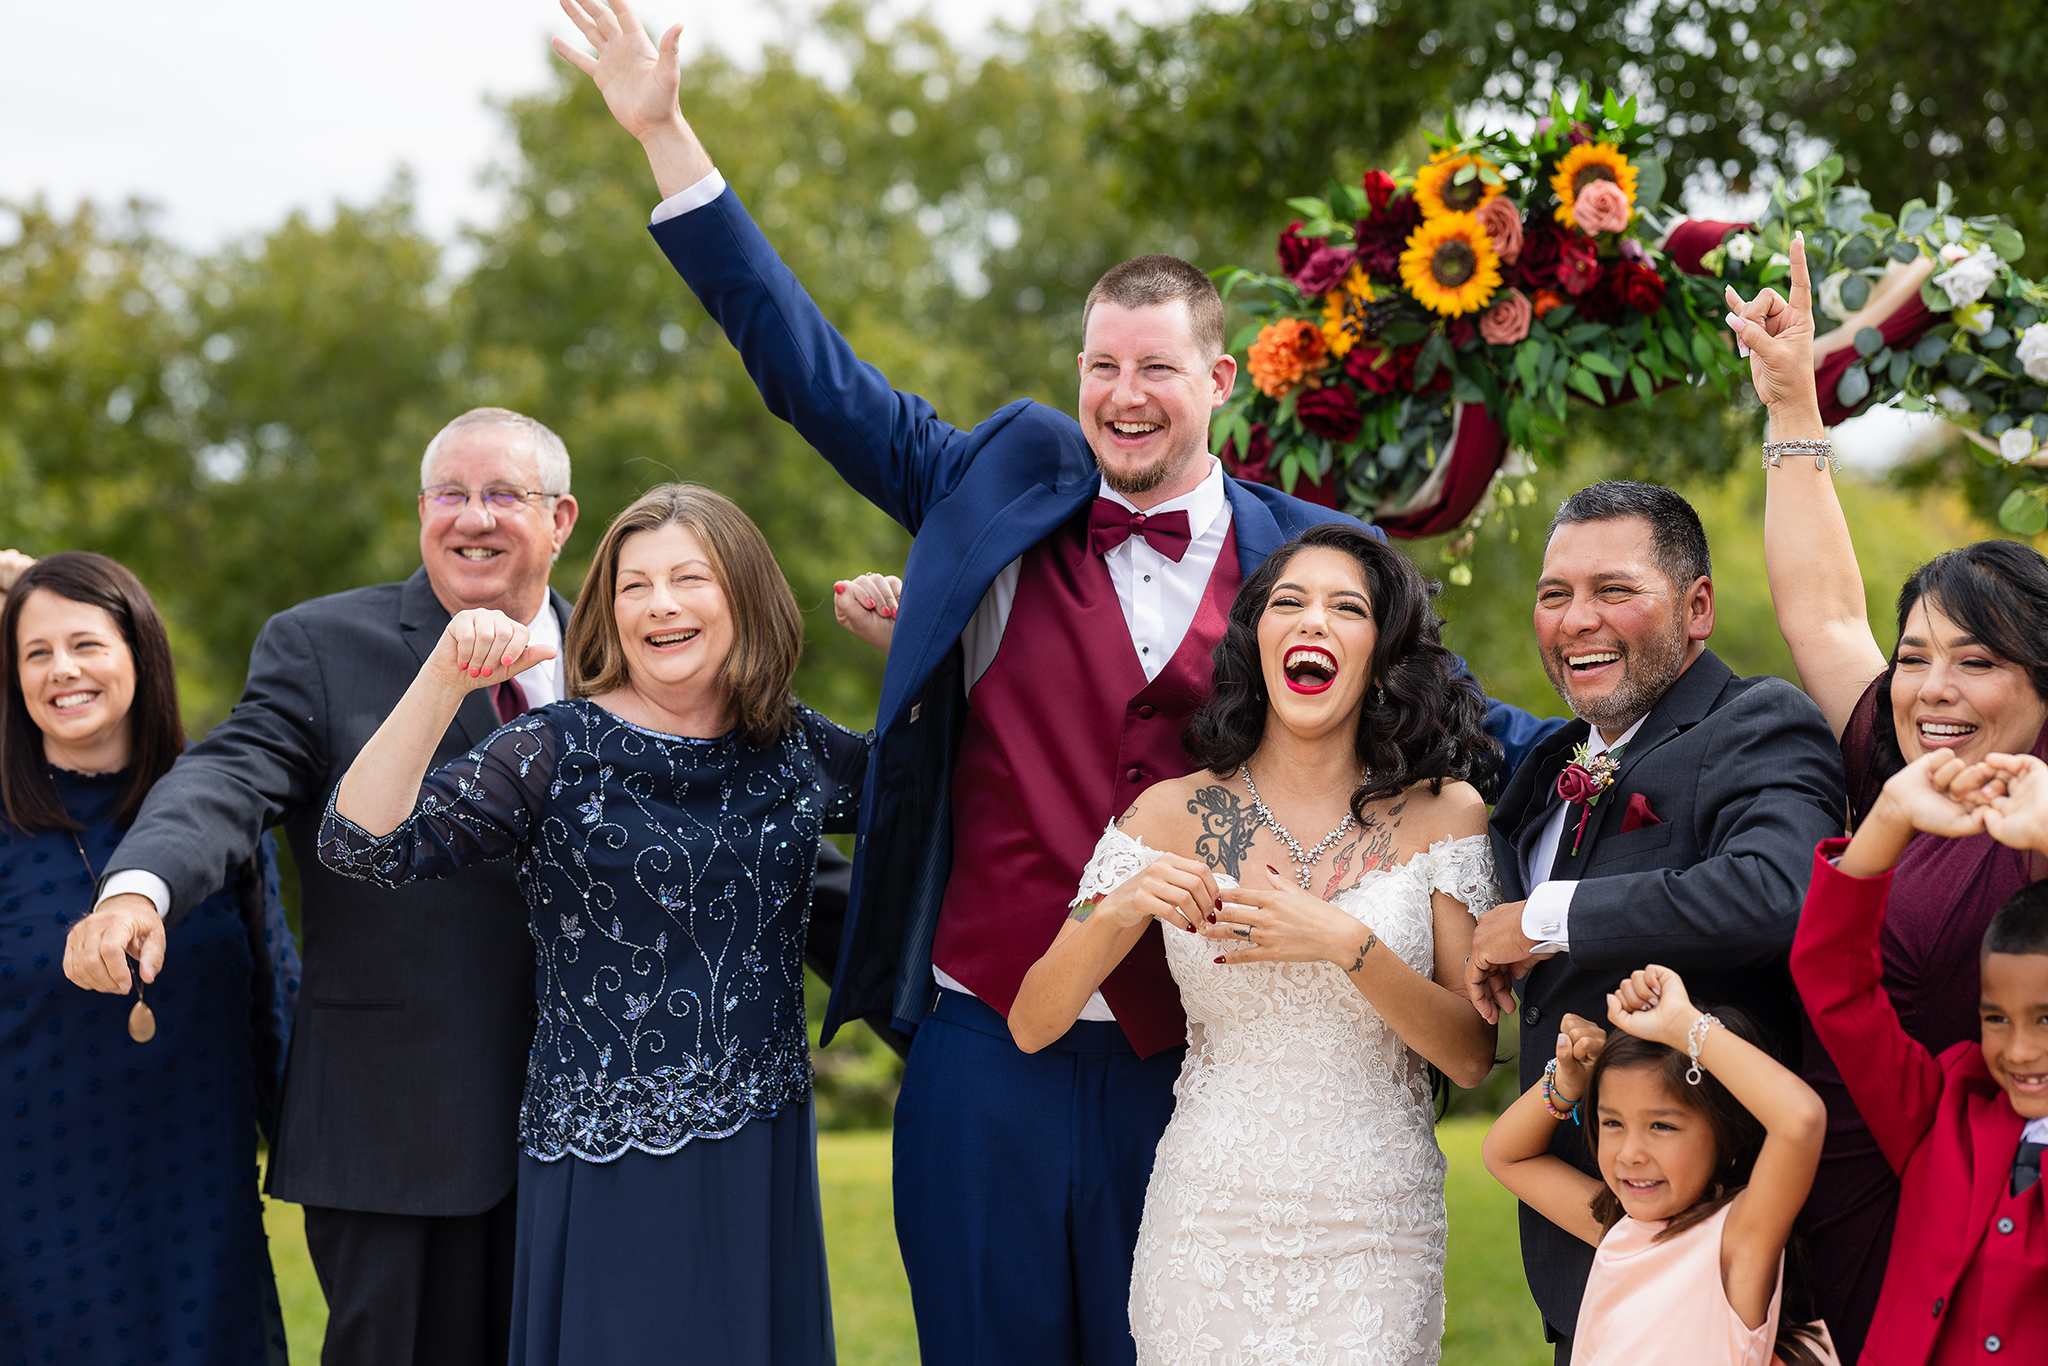 Bride, groom and family celebrating after wedding ceremony at wedding venue in Azle TX